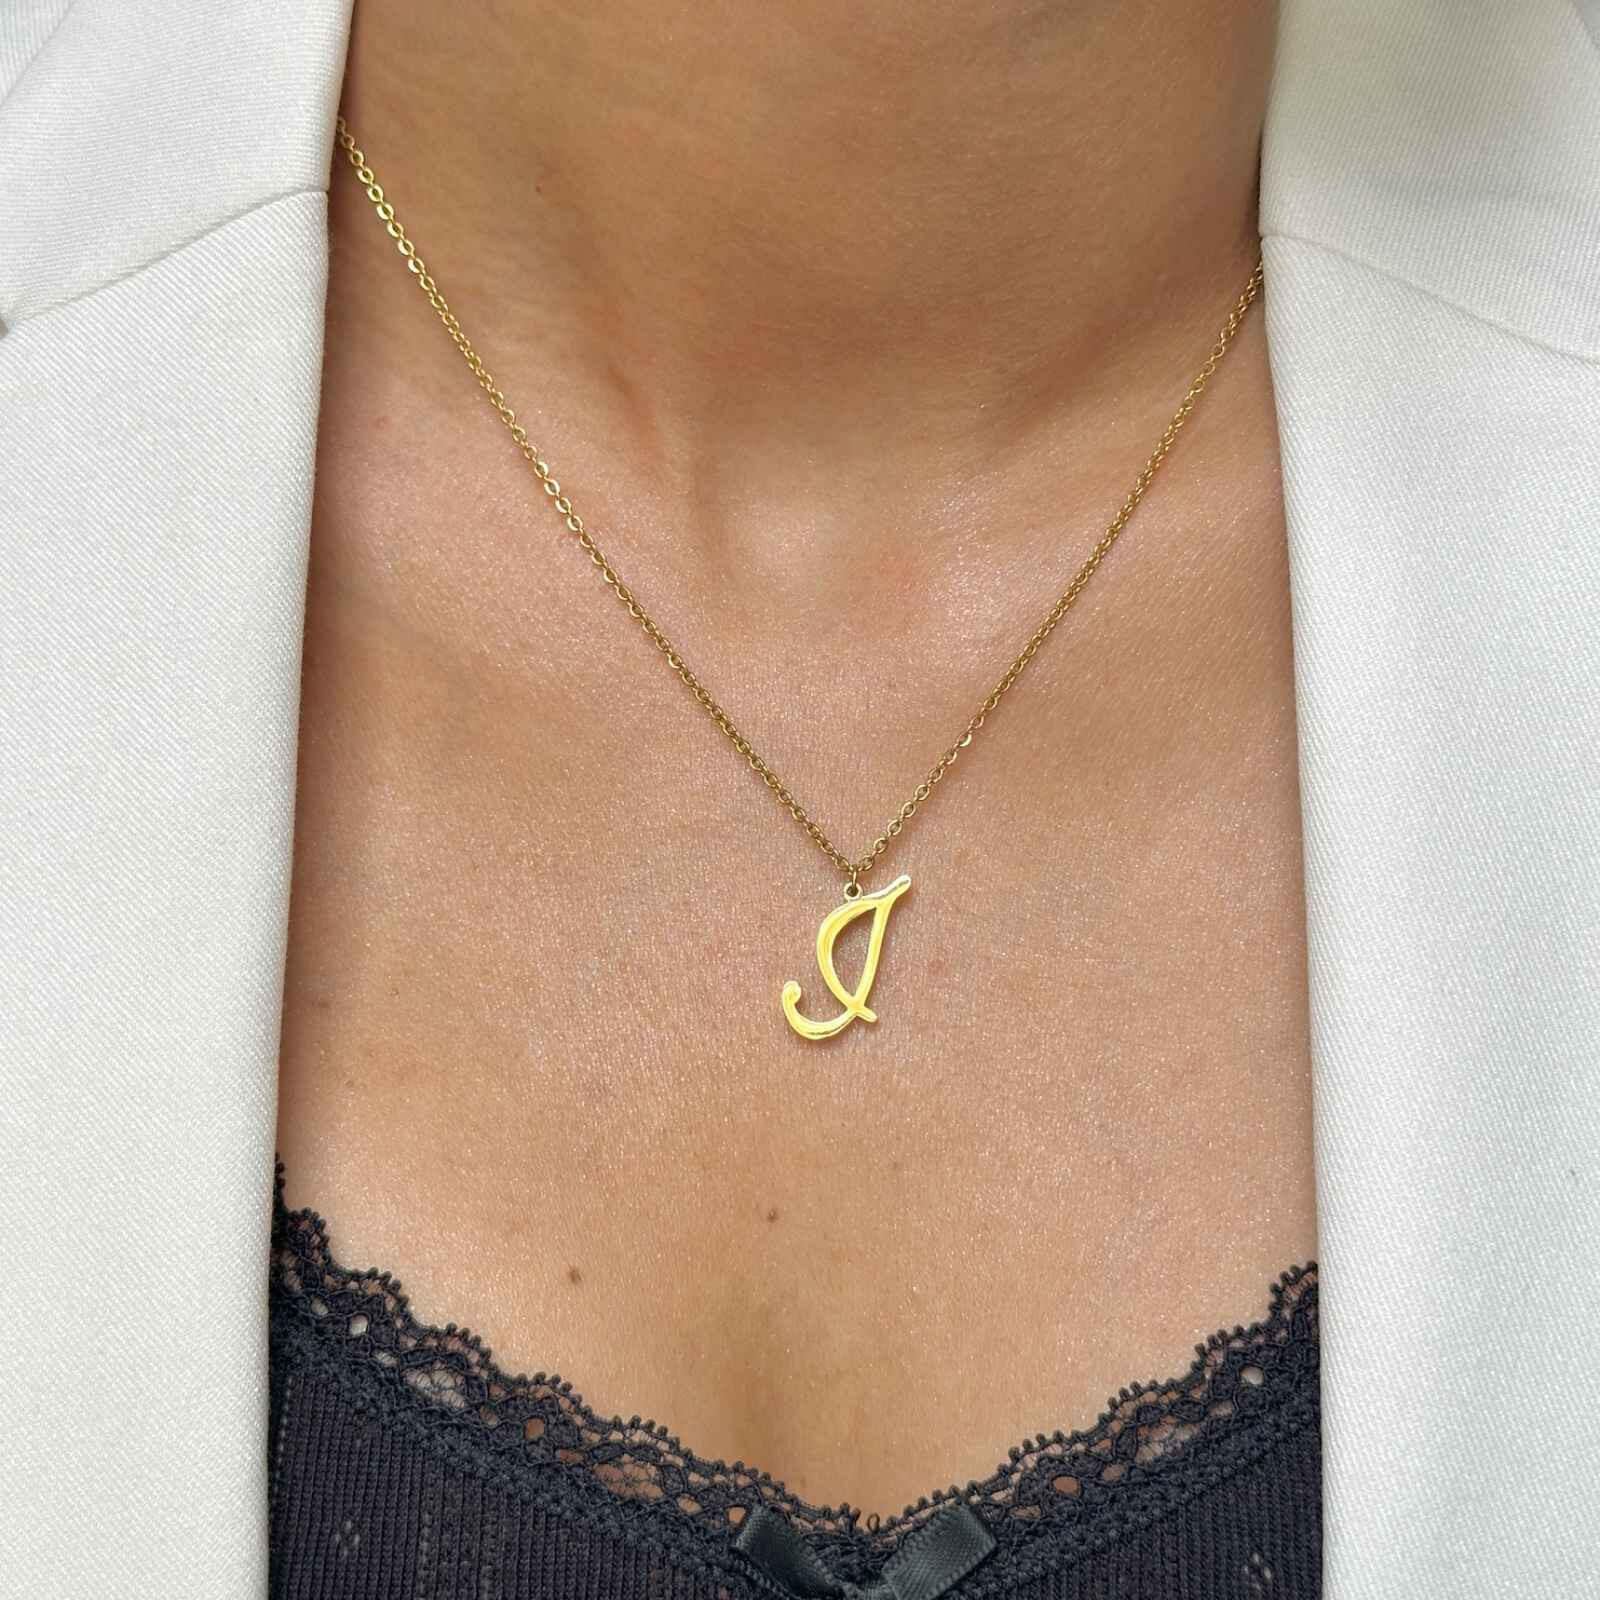 Cursive Initial Necklace  The Chic Women.